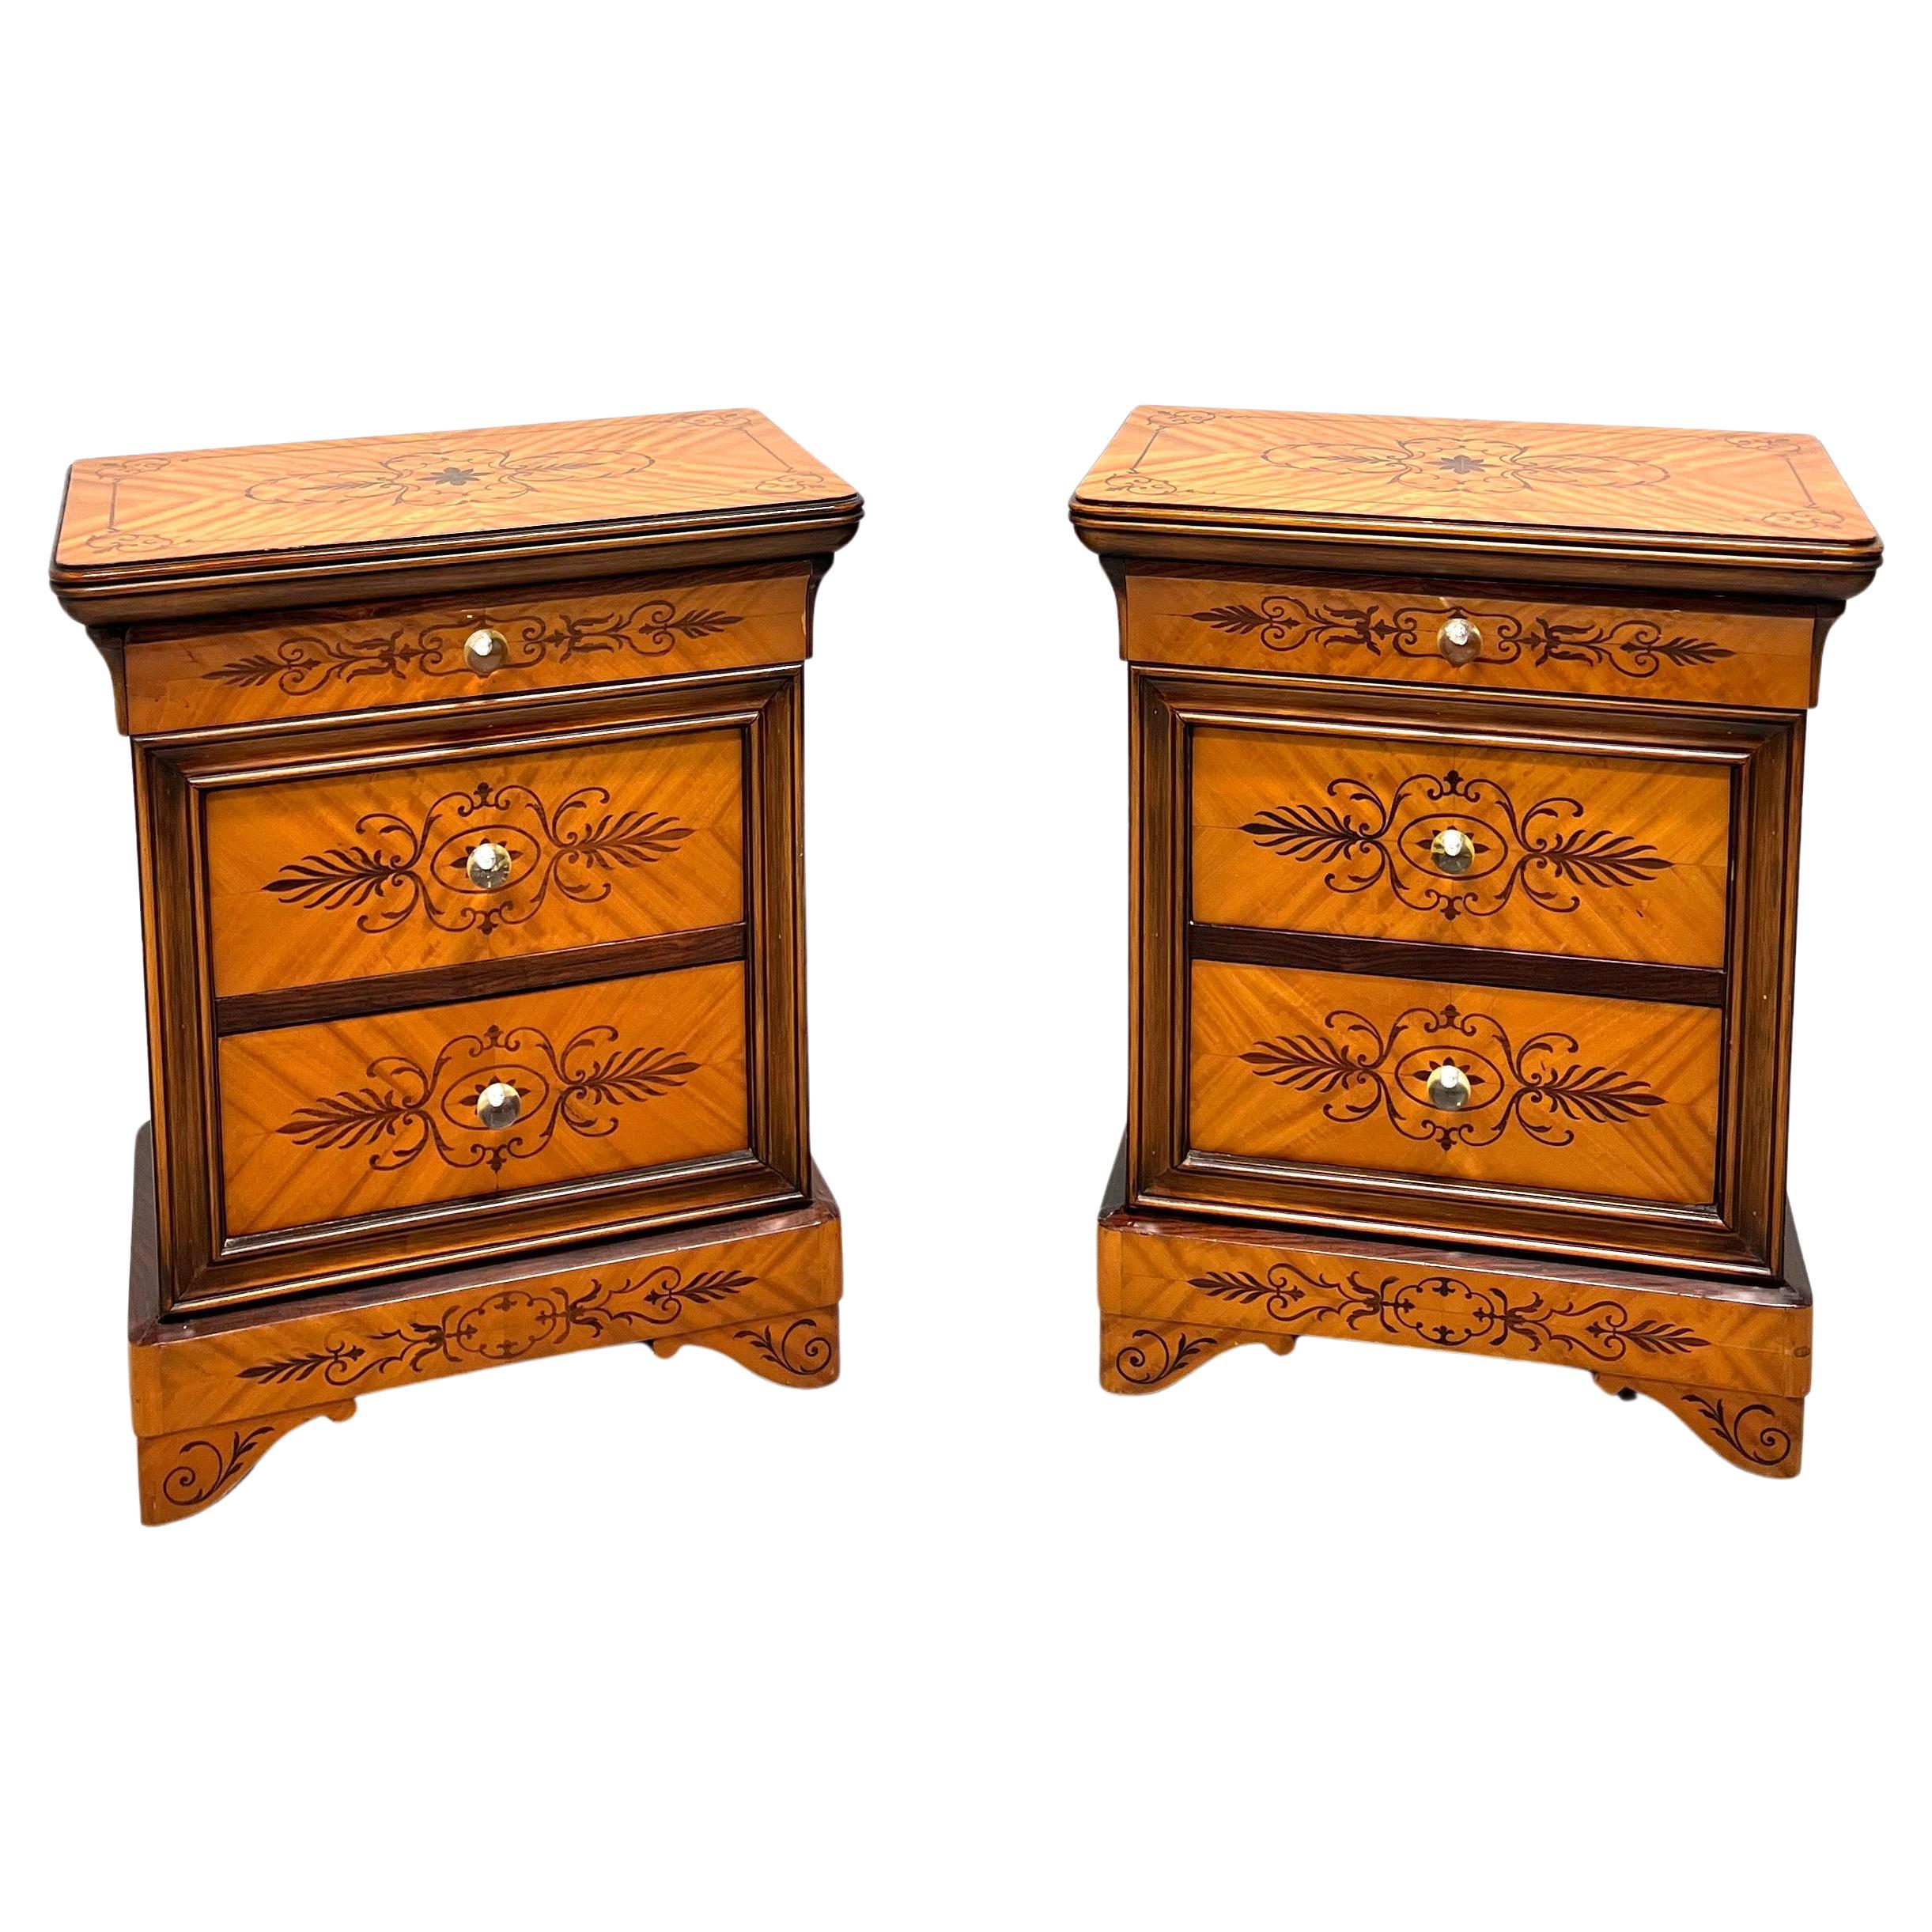 Early 20th Century Biedermeier Style Marquetry Nightstands Bedside Chests - Pair For Sale